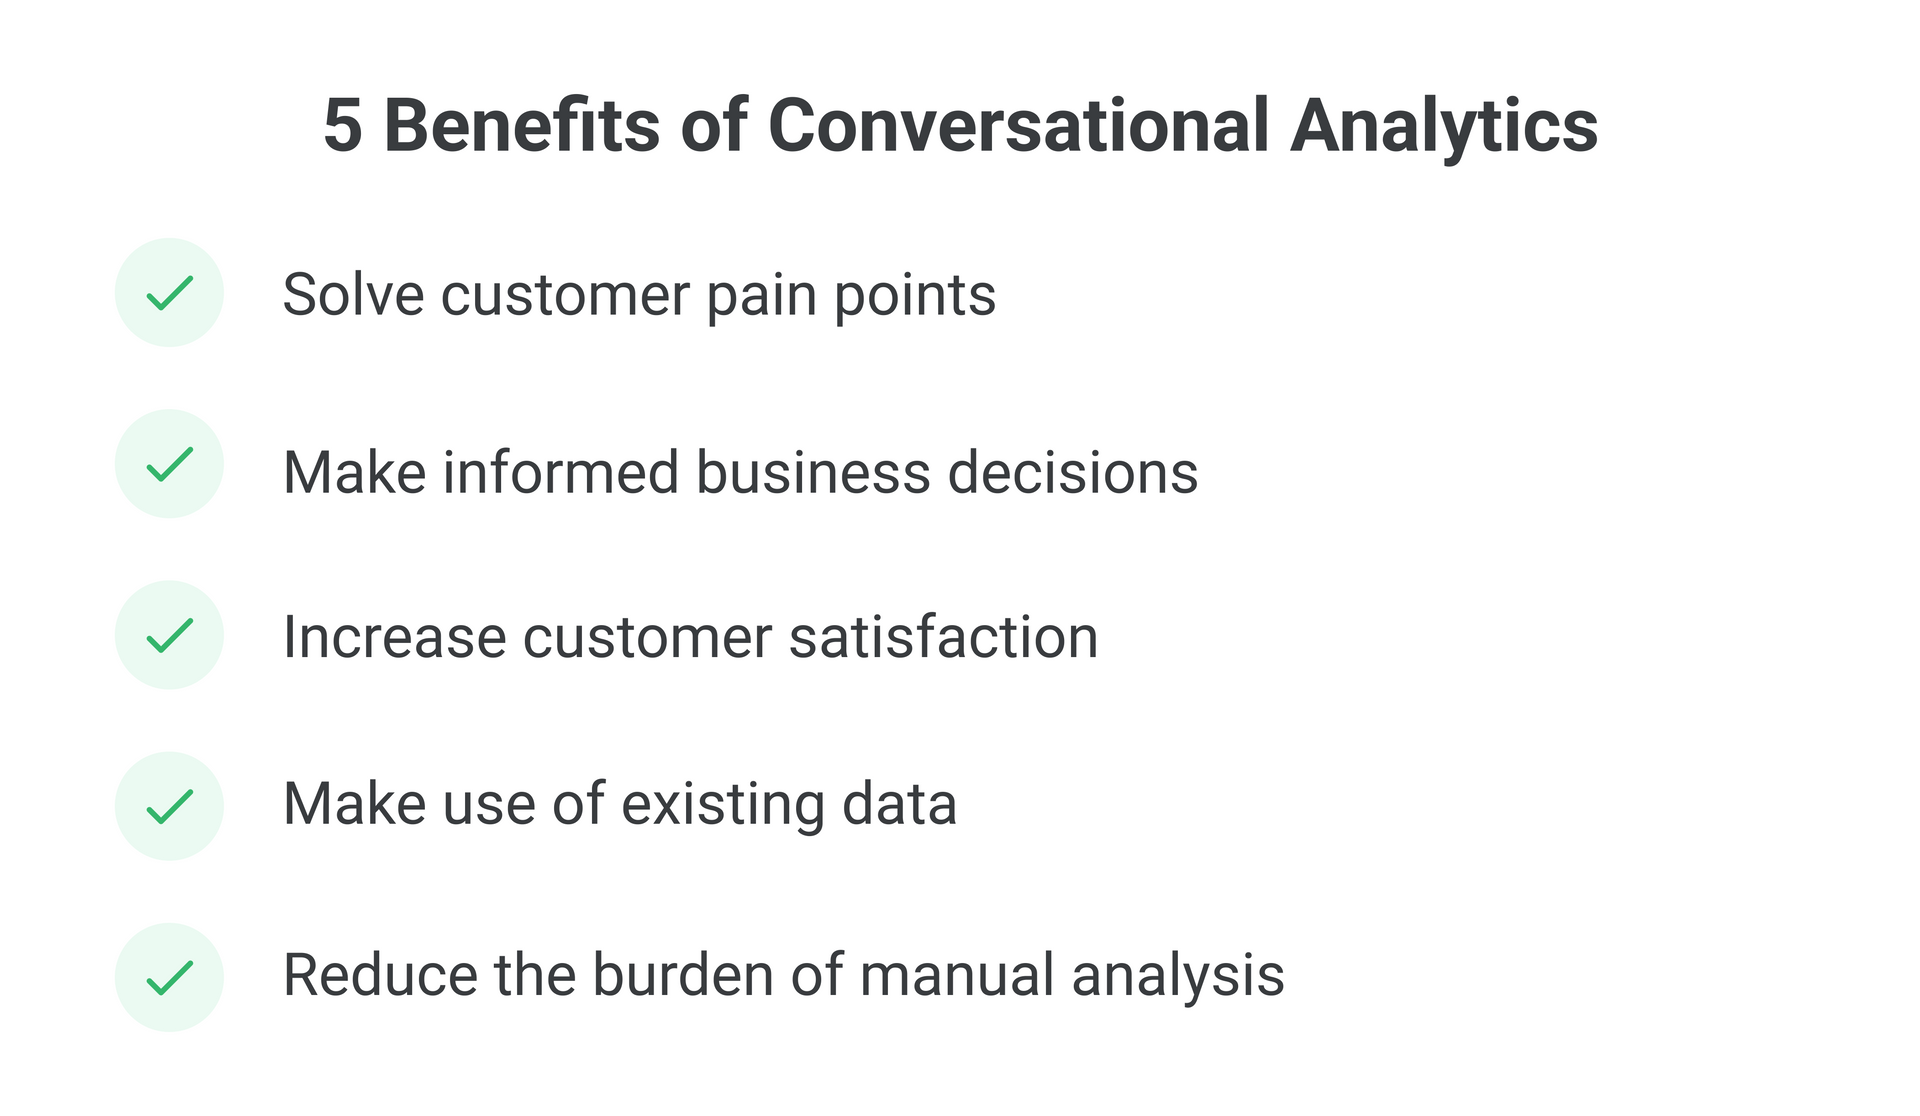 With conversational analytics you can solve customer pain points, make informed business decisions, increase customer satisfaction, make use of existing data, and reduce the burden of manual analysis.